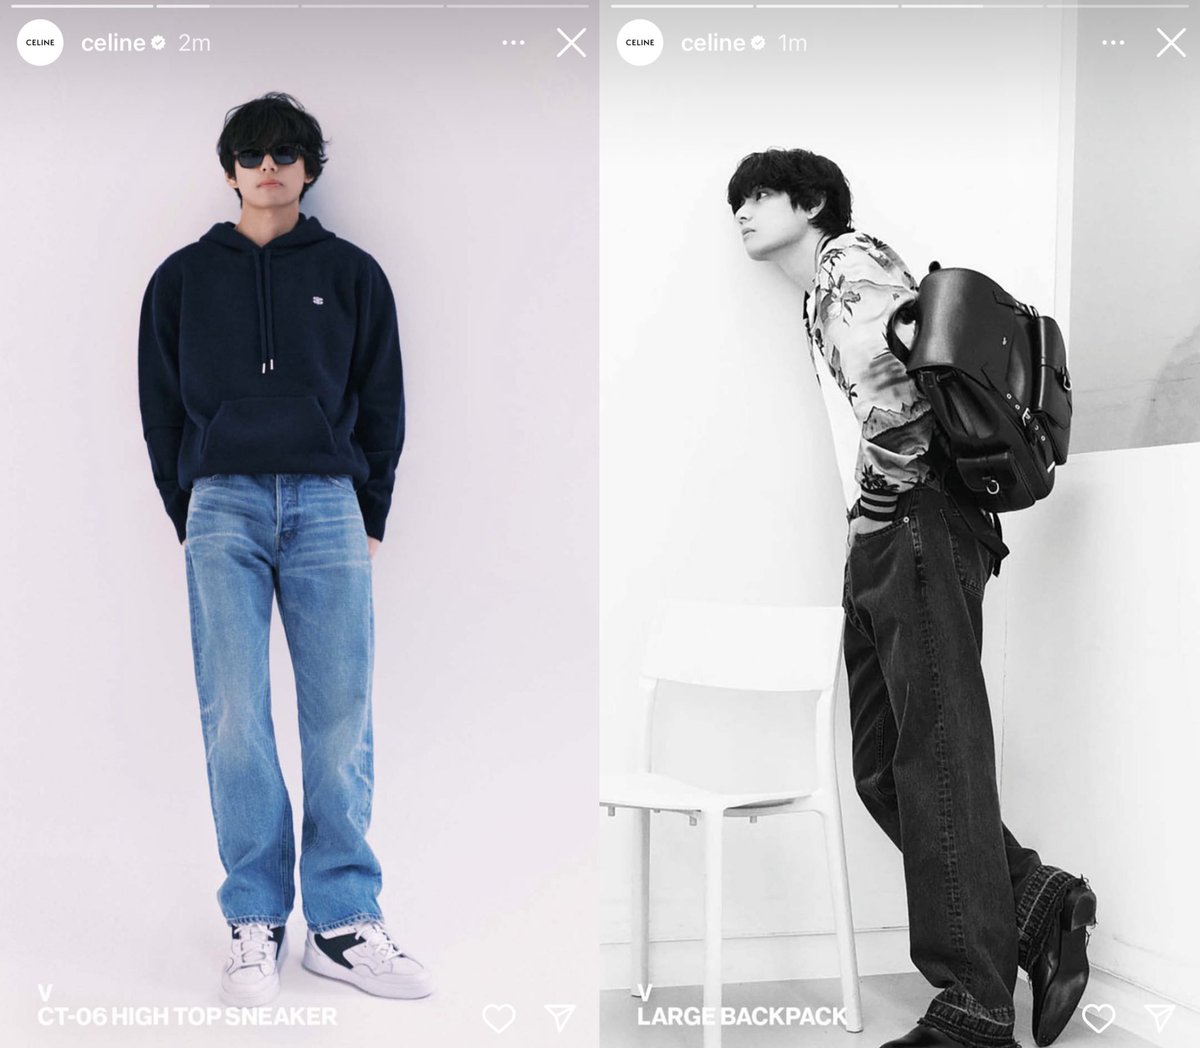 World Music Awards on X: #BTS' #V displays his influence as brand  ambassador for #CELINE, selling out various items immediately from his look  at the opening of CELINE's pop-up store in Seoul